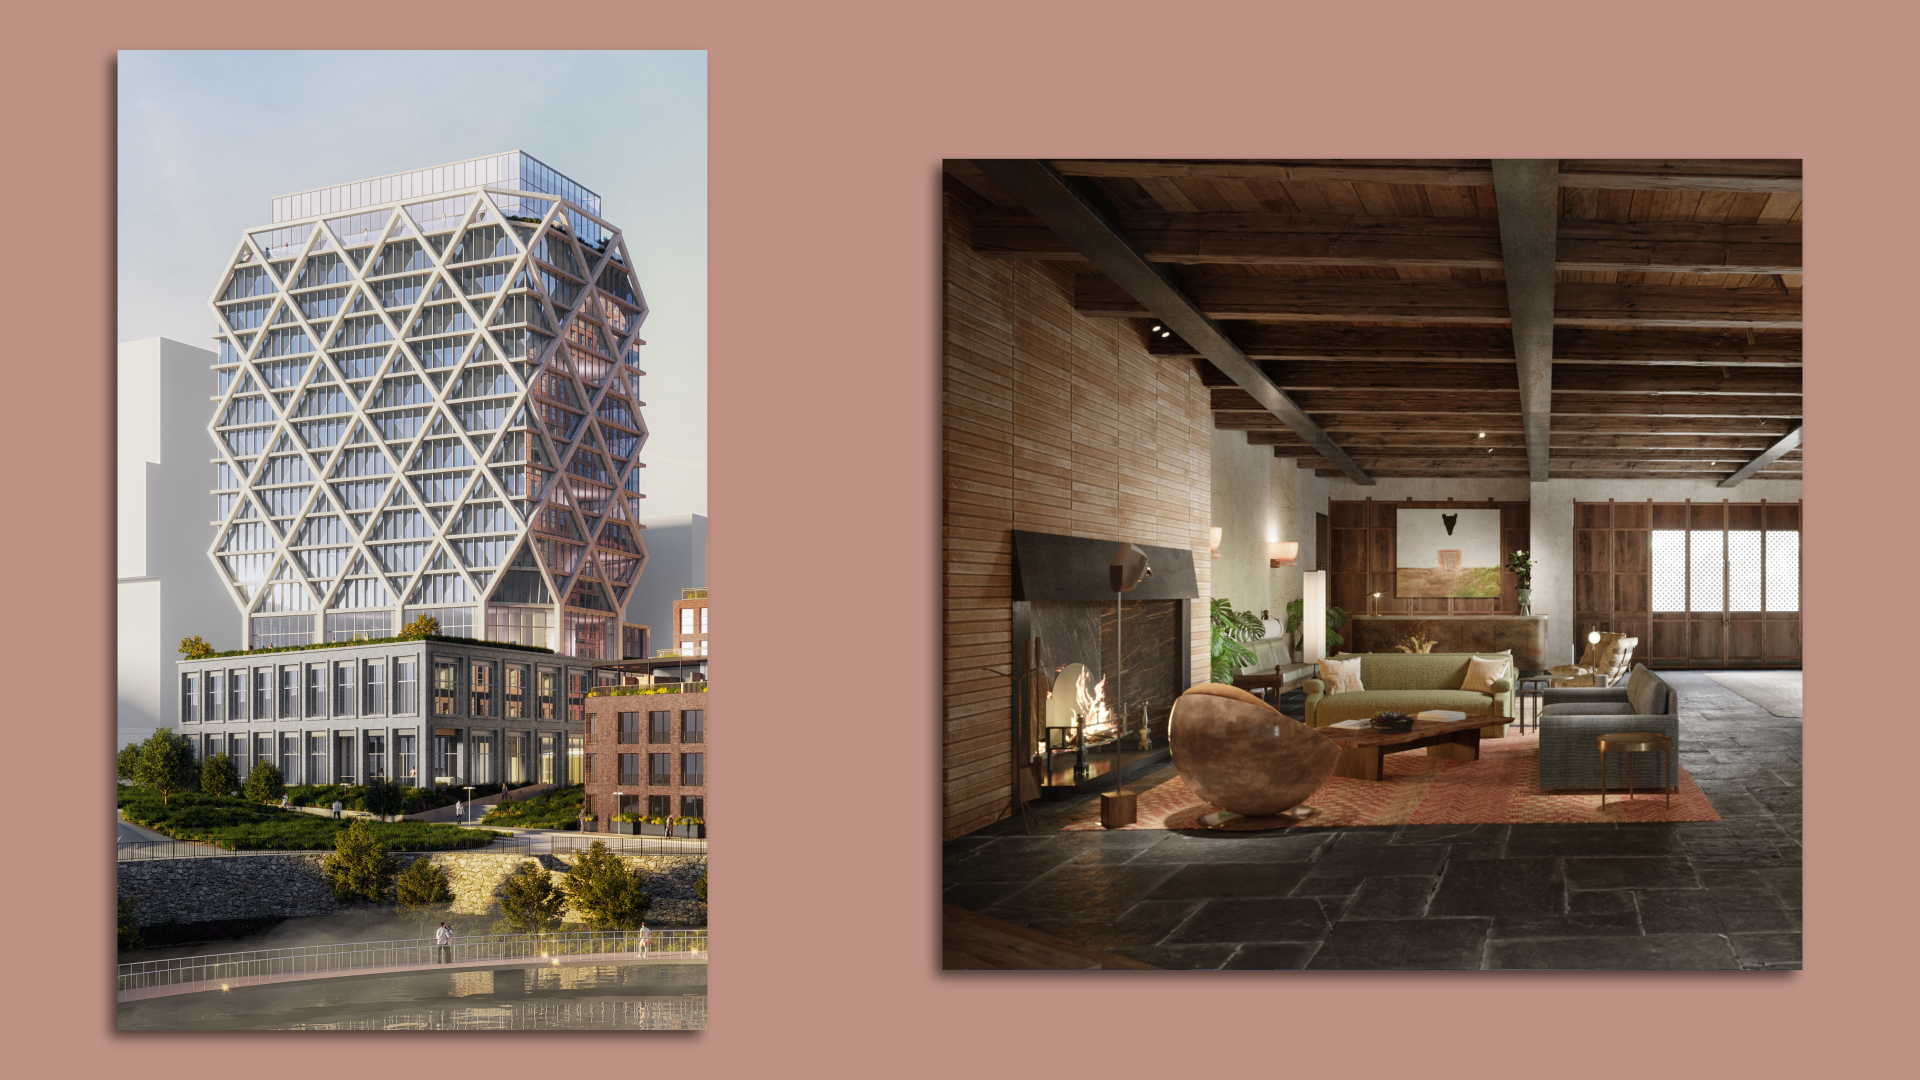 Side by side renderings of a 16-floor tower with a diagonal-grid exterior and a lobby with a large fireplace, seating area and wooden beams